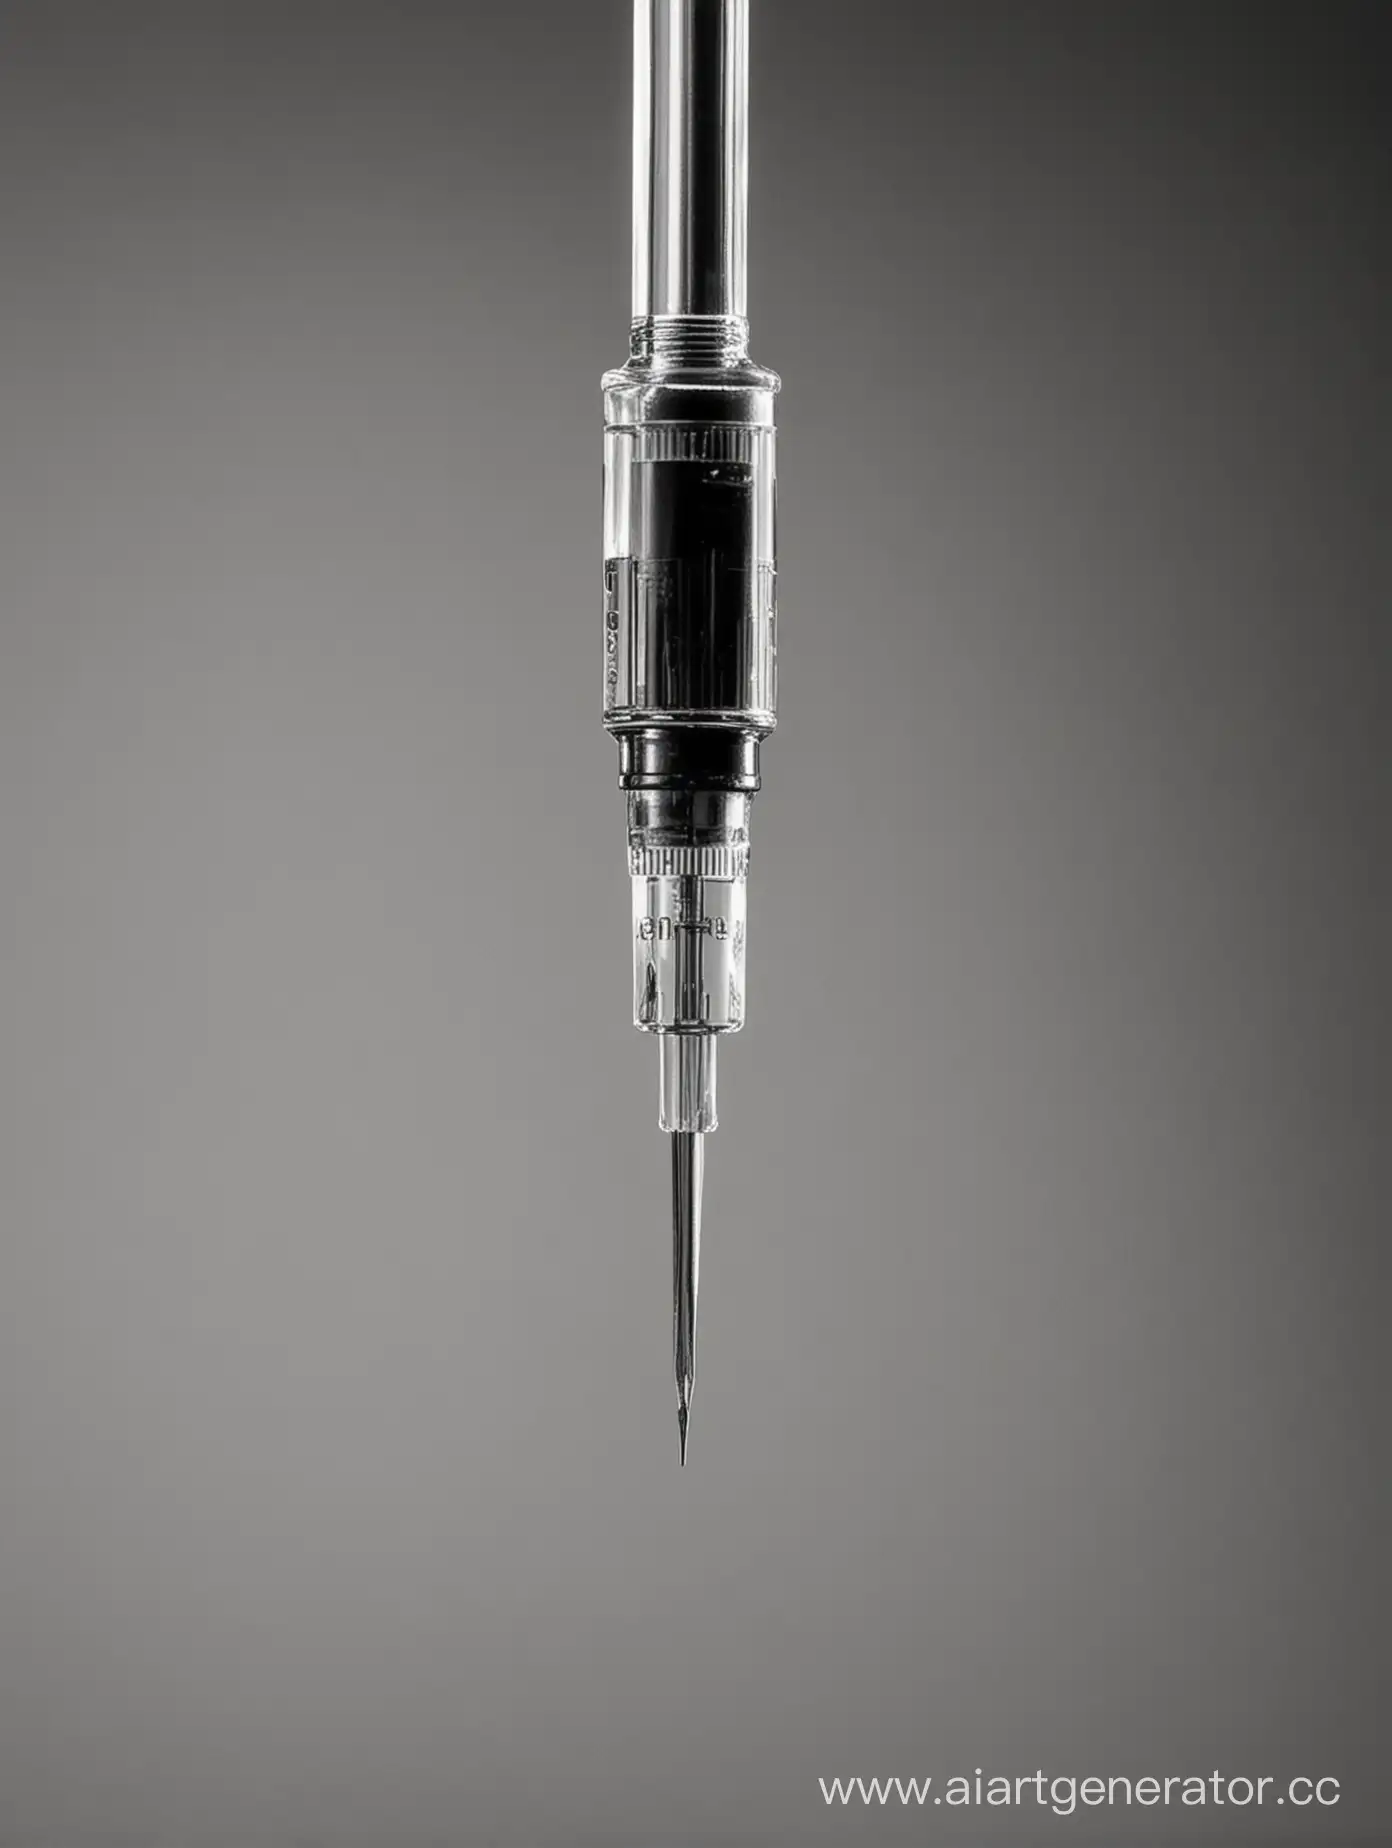 Monochrome-Injection-Needle-Minimalist-Medical-Tool-in-Black-and-White